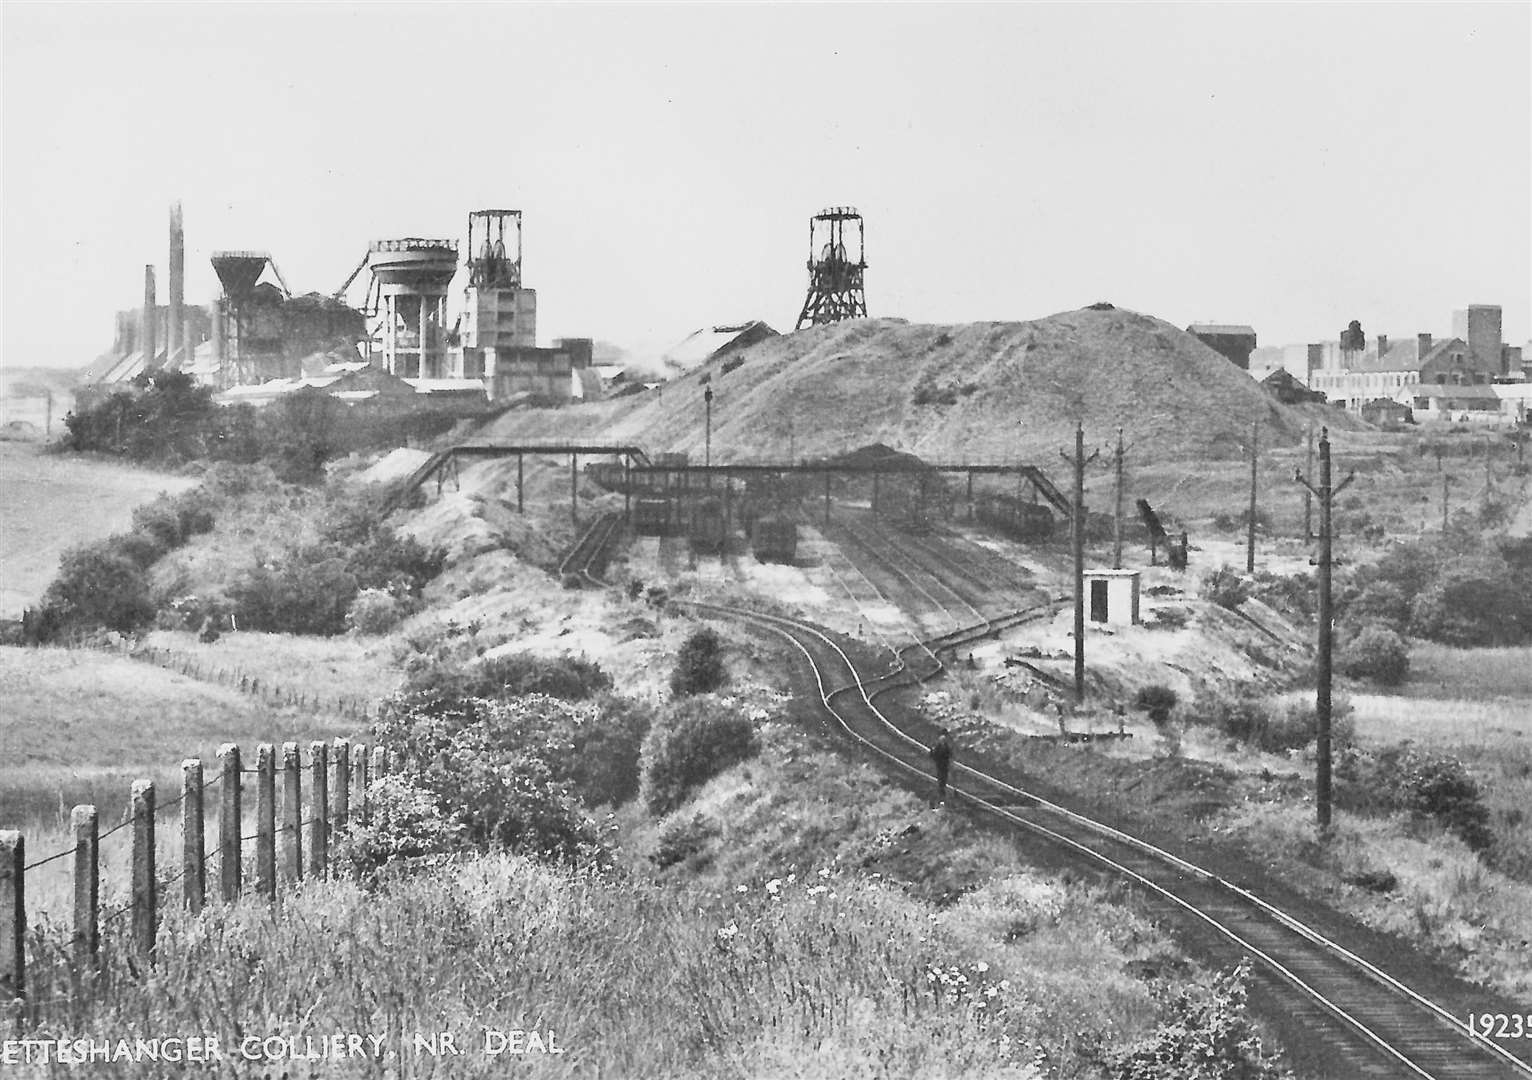 A wiew of Betteshanger Colliery. Picture: Colin Varrall